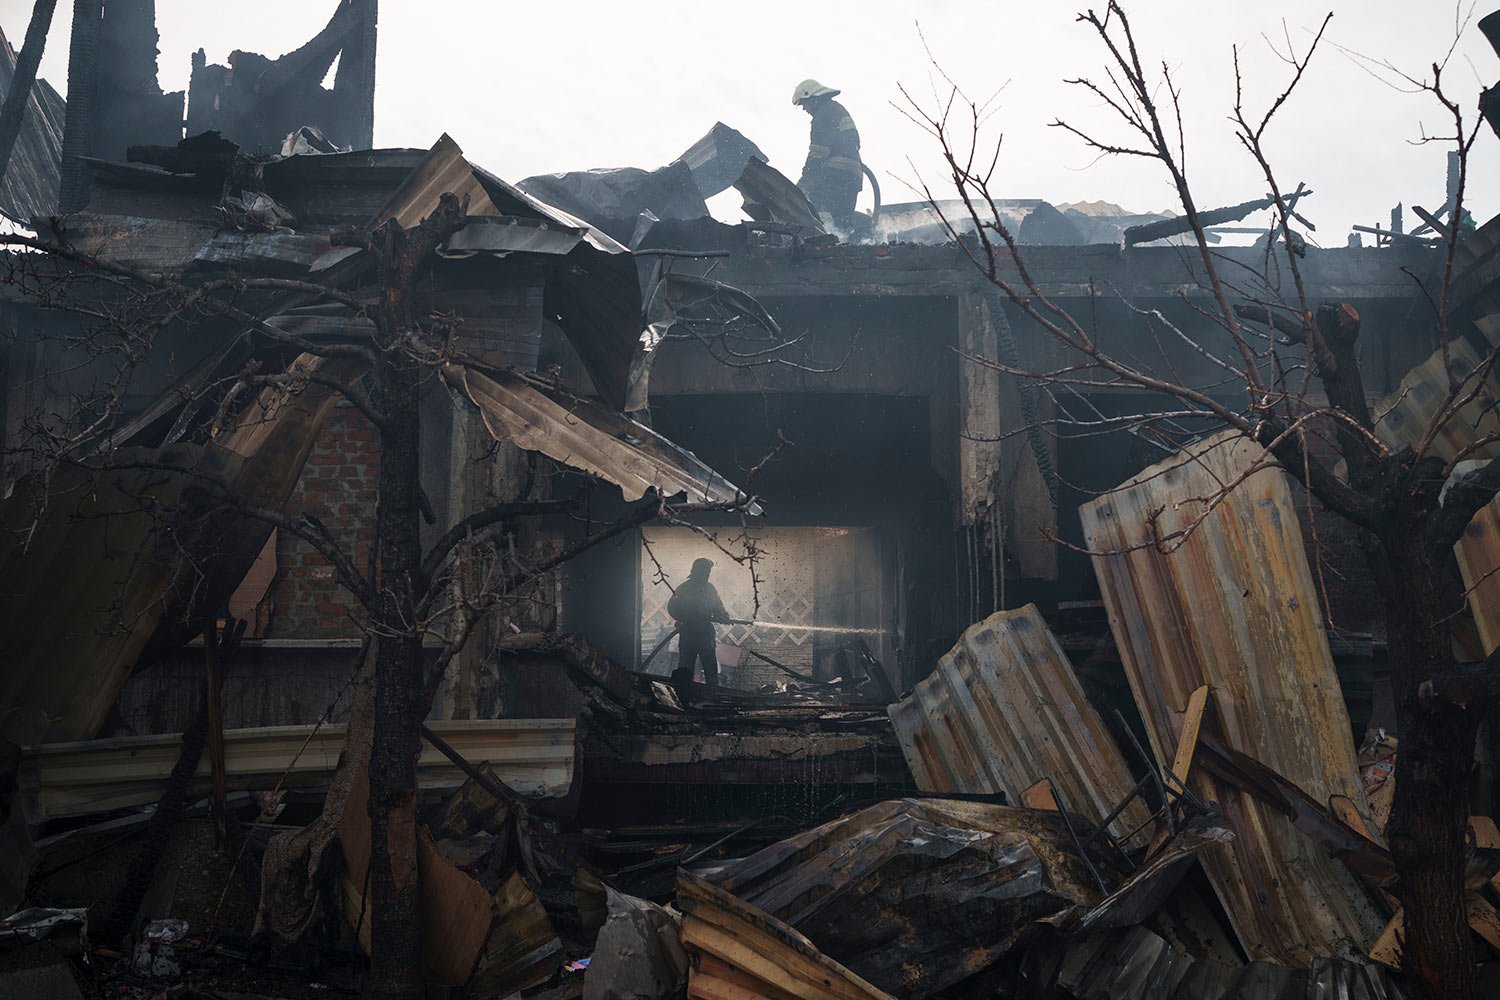  Firefighters work to extinguish a blaze at a house after a Russian attack in Kharkiv, Ukraine, Monday, April 11, 2022. (AP Photo/Felipe Dana)  